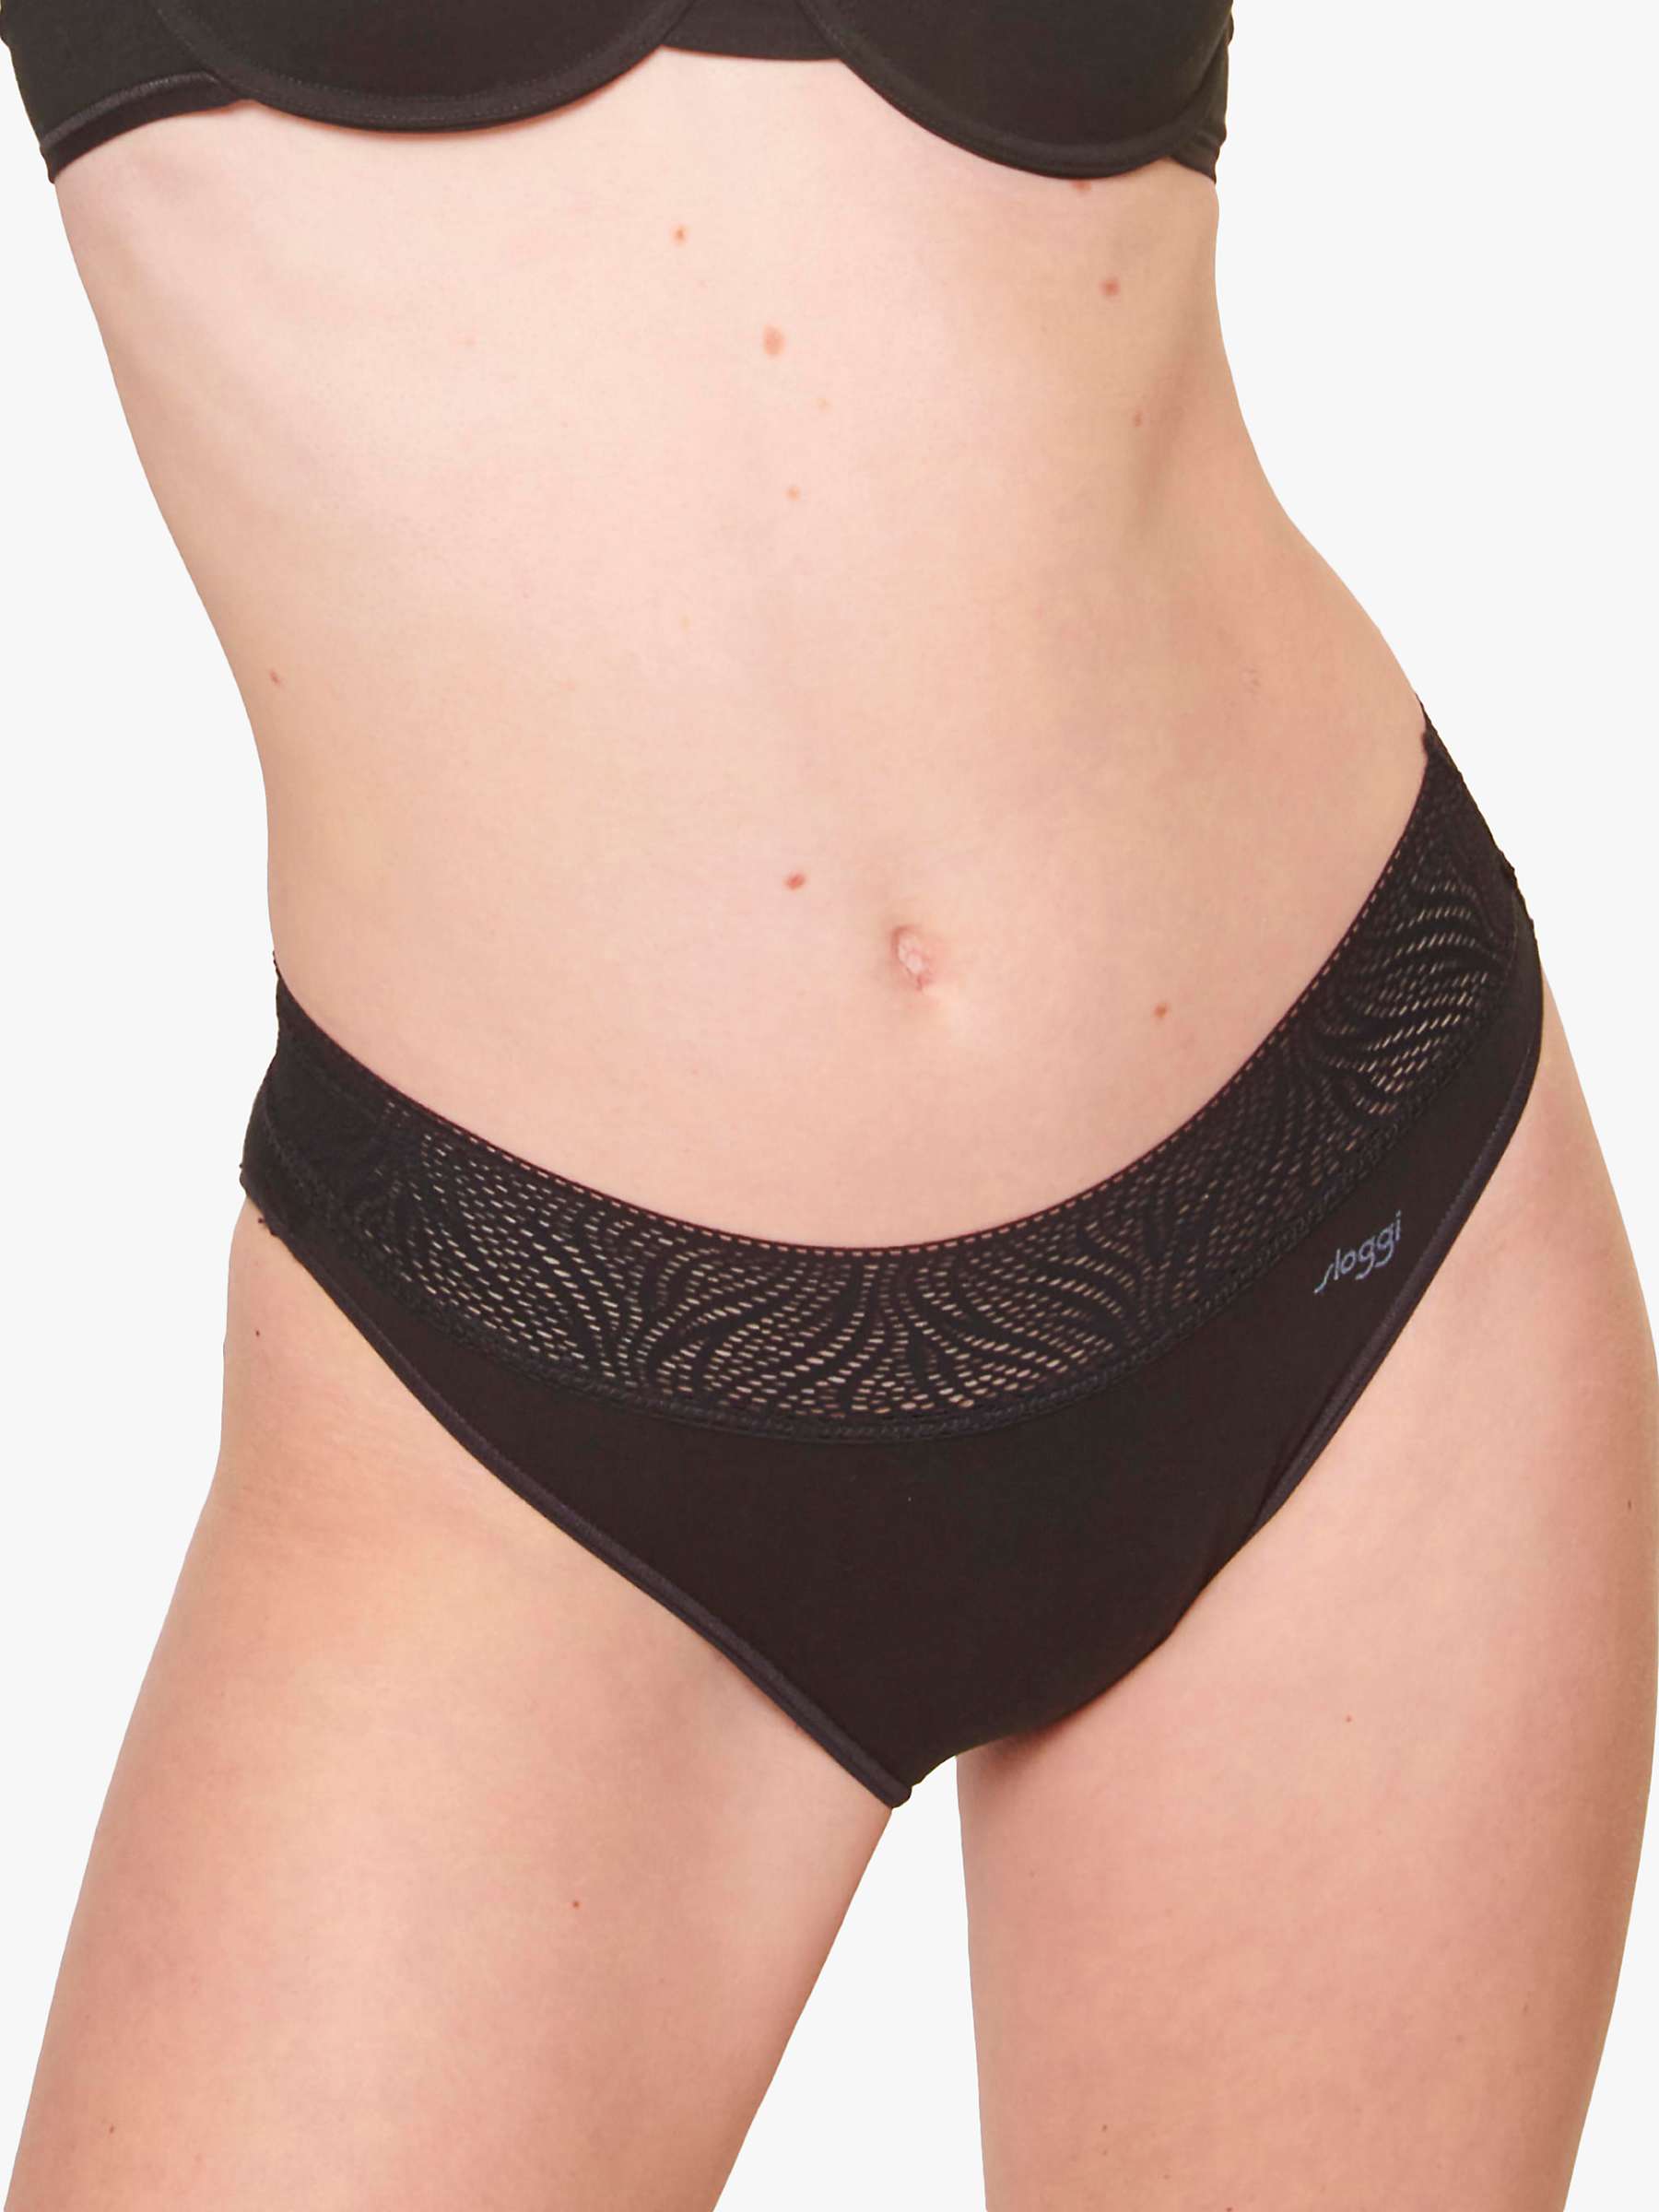 Buy sloggi High Absorbency Tai Period Knickers, Pack of 2, Black Online at johnlewis.com